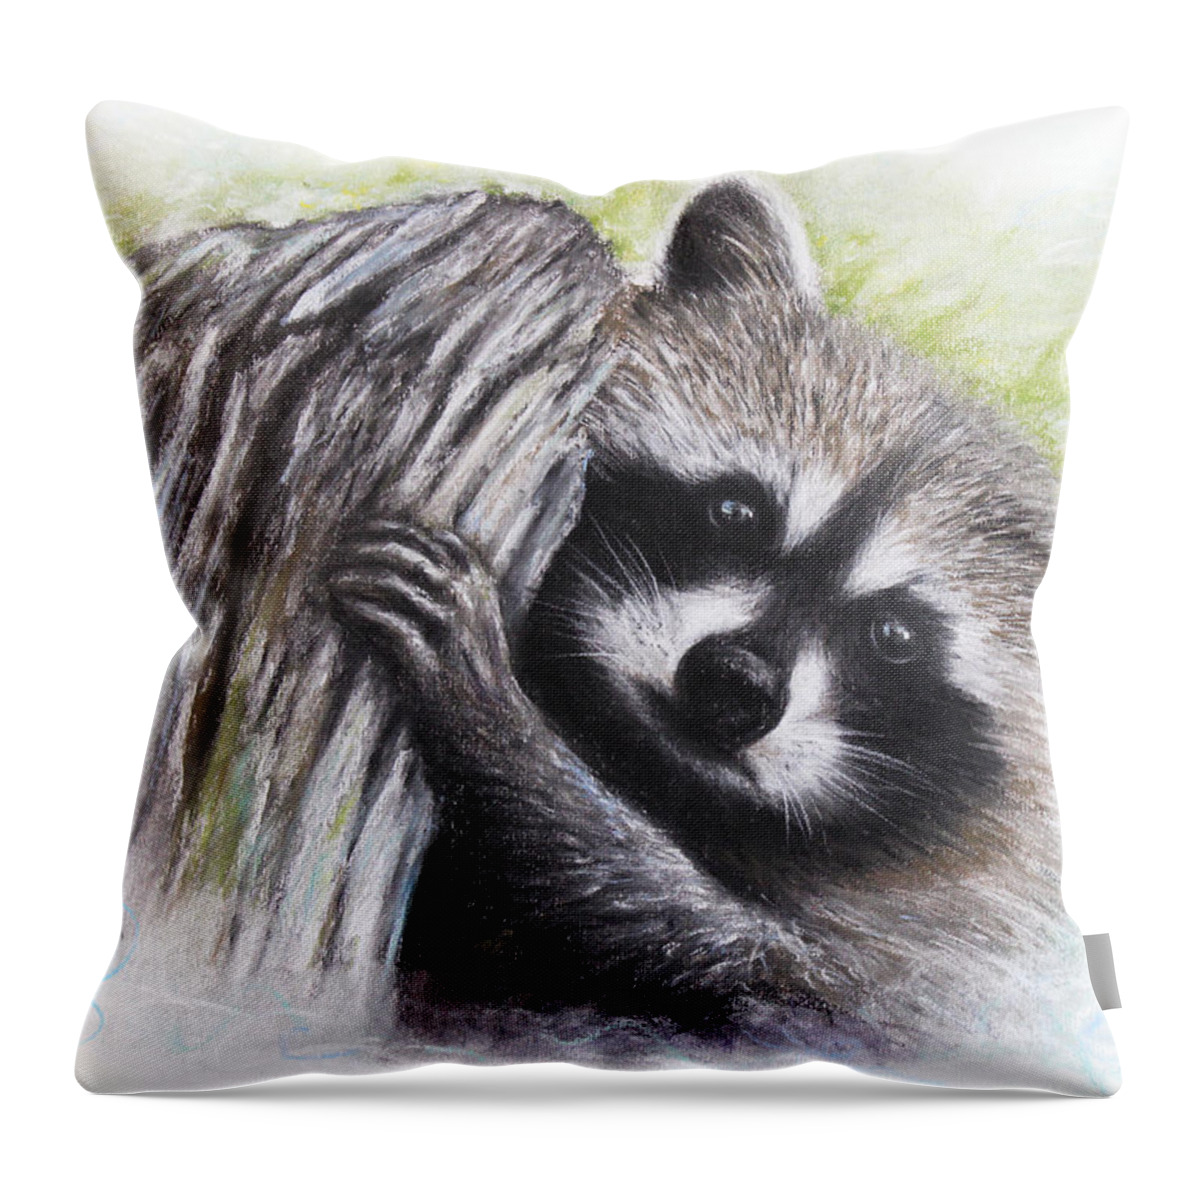 Racoon Throw Pillow featuring the drawing Raccoon by Patricia Lintner